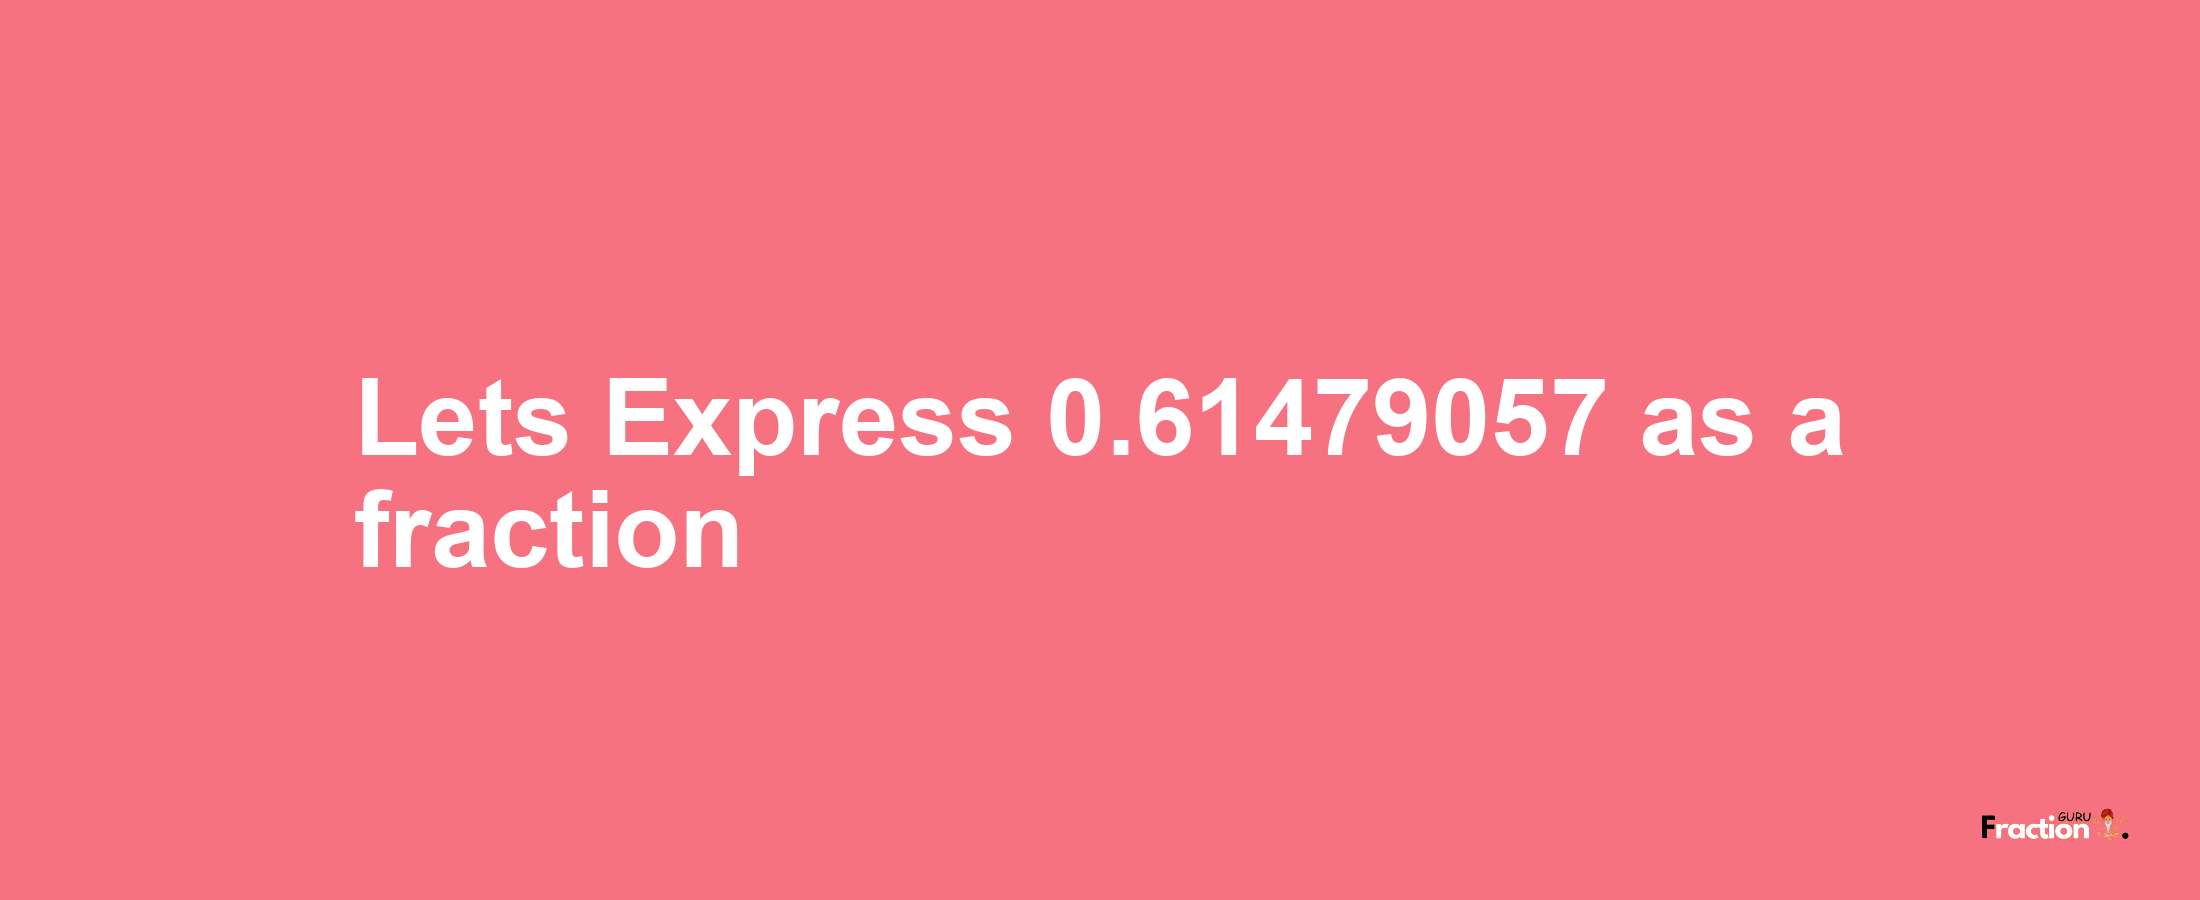 Lets Express 0.61479057 as afraction